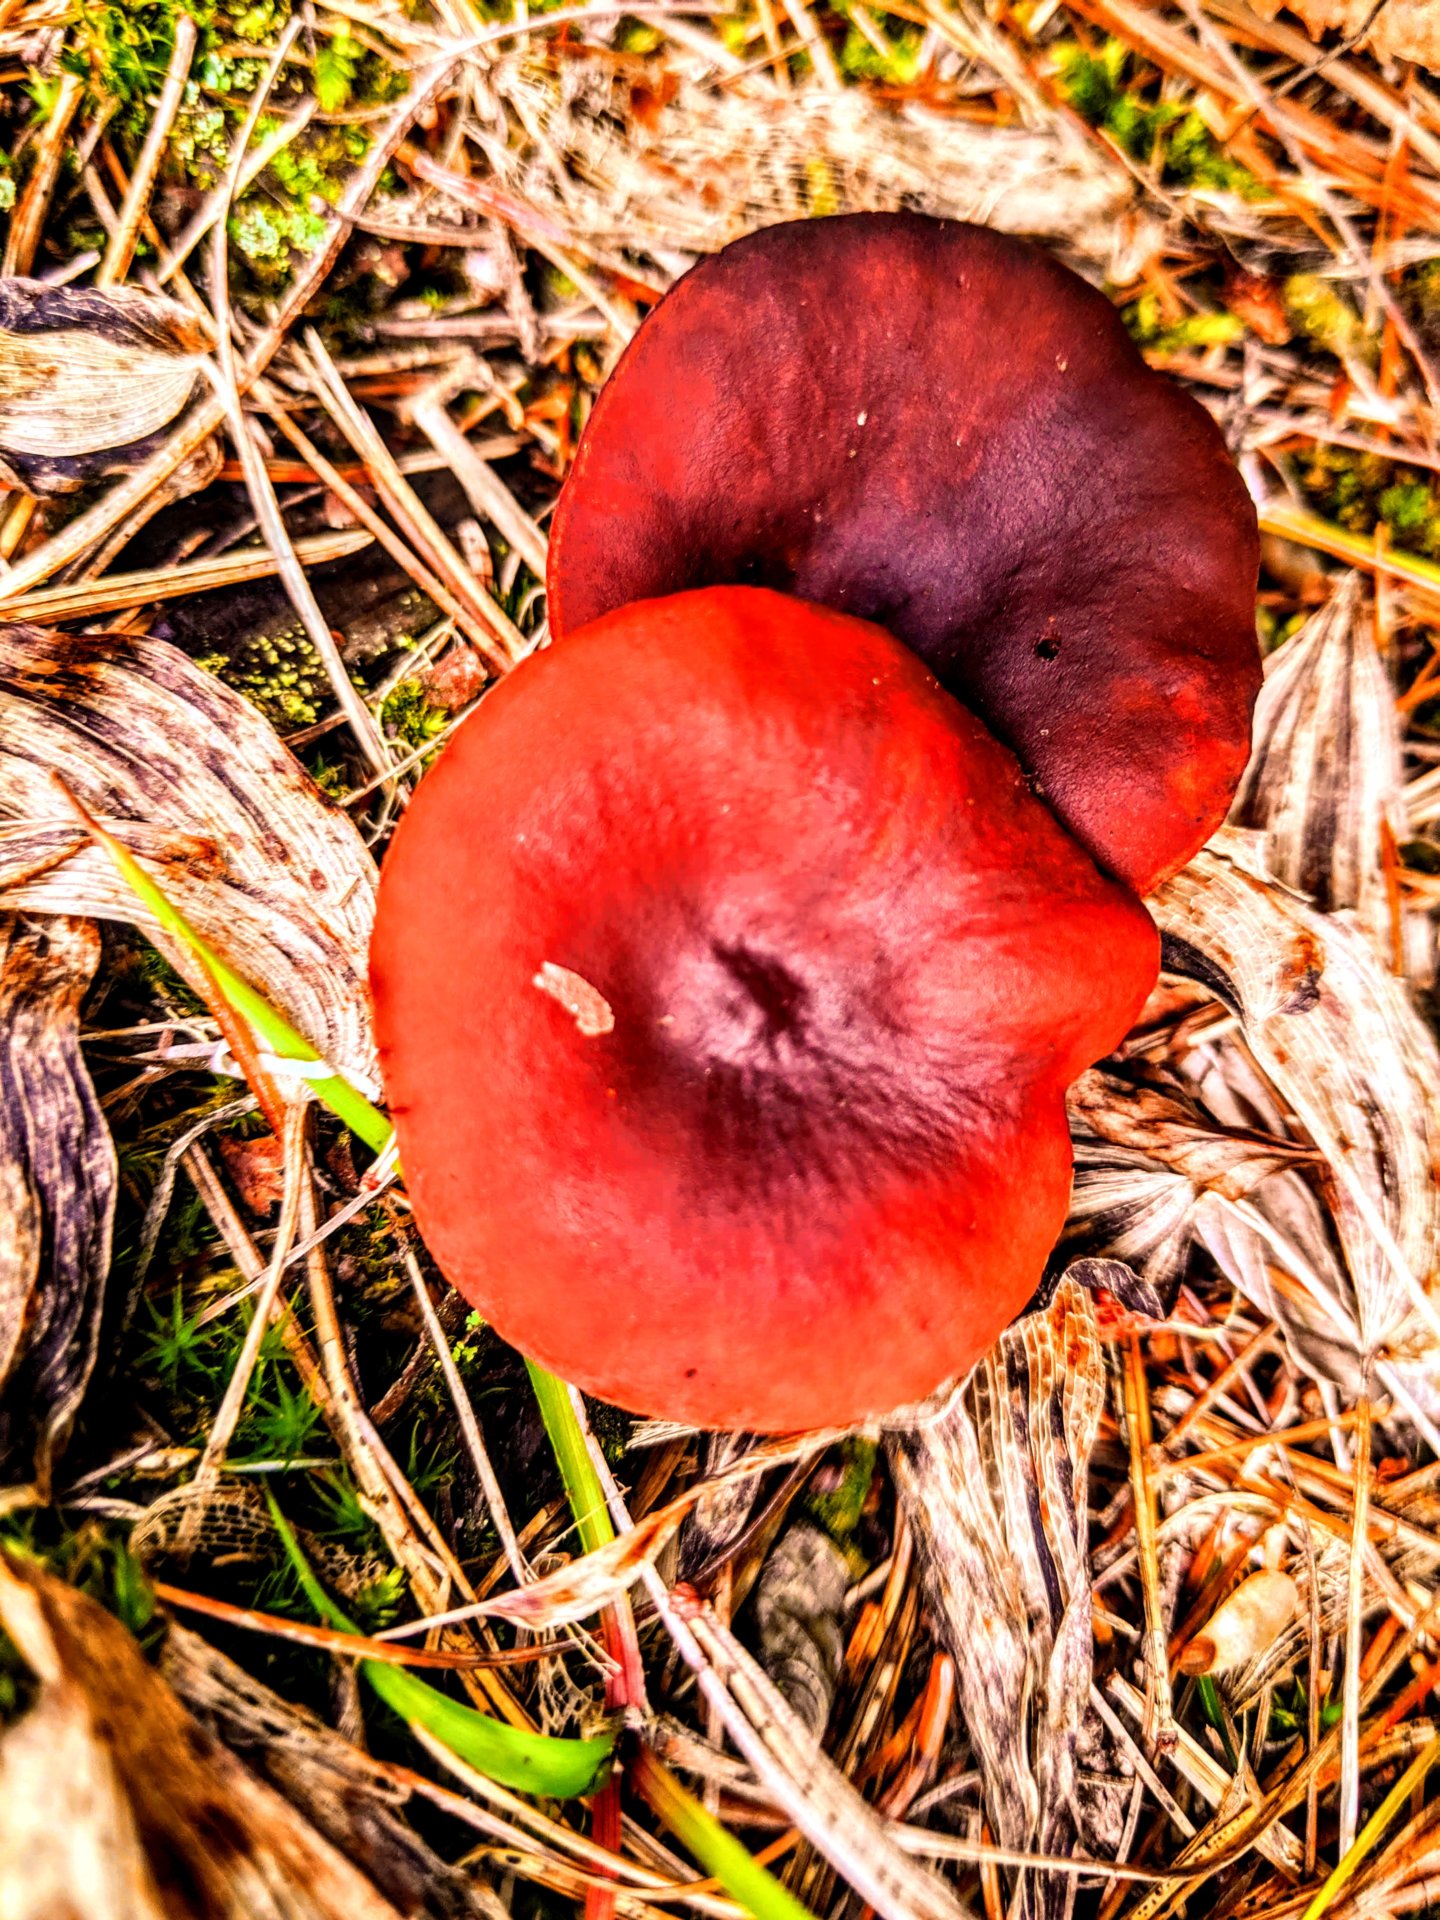 red, round mushrooms, in Downeast, Maine. 2019